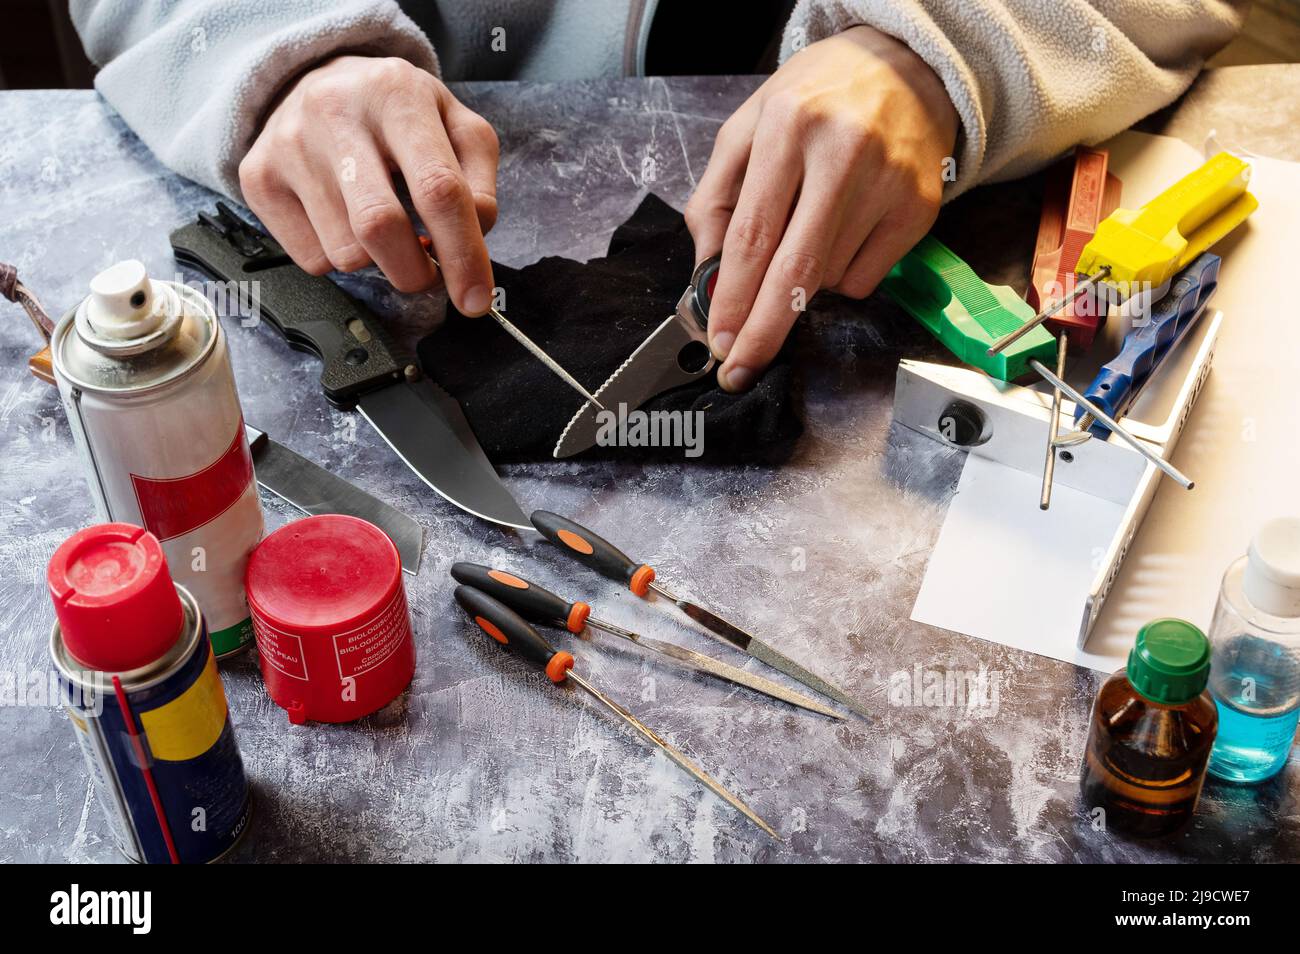 Sharpen the serrated knife. Sharpen a knife with a saw. Tool in hand. Oil, grindstones and tools on the table. Stock Photo